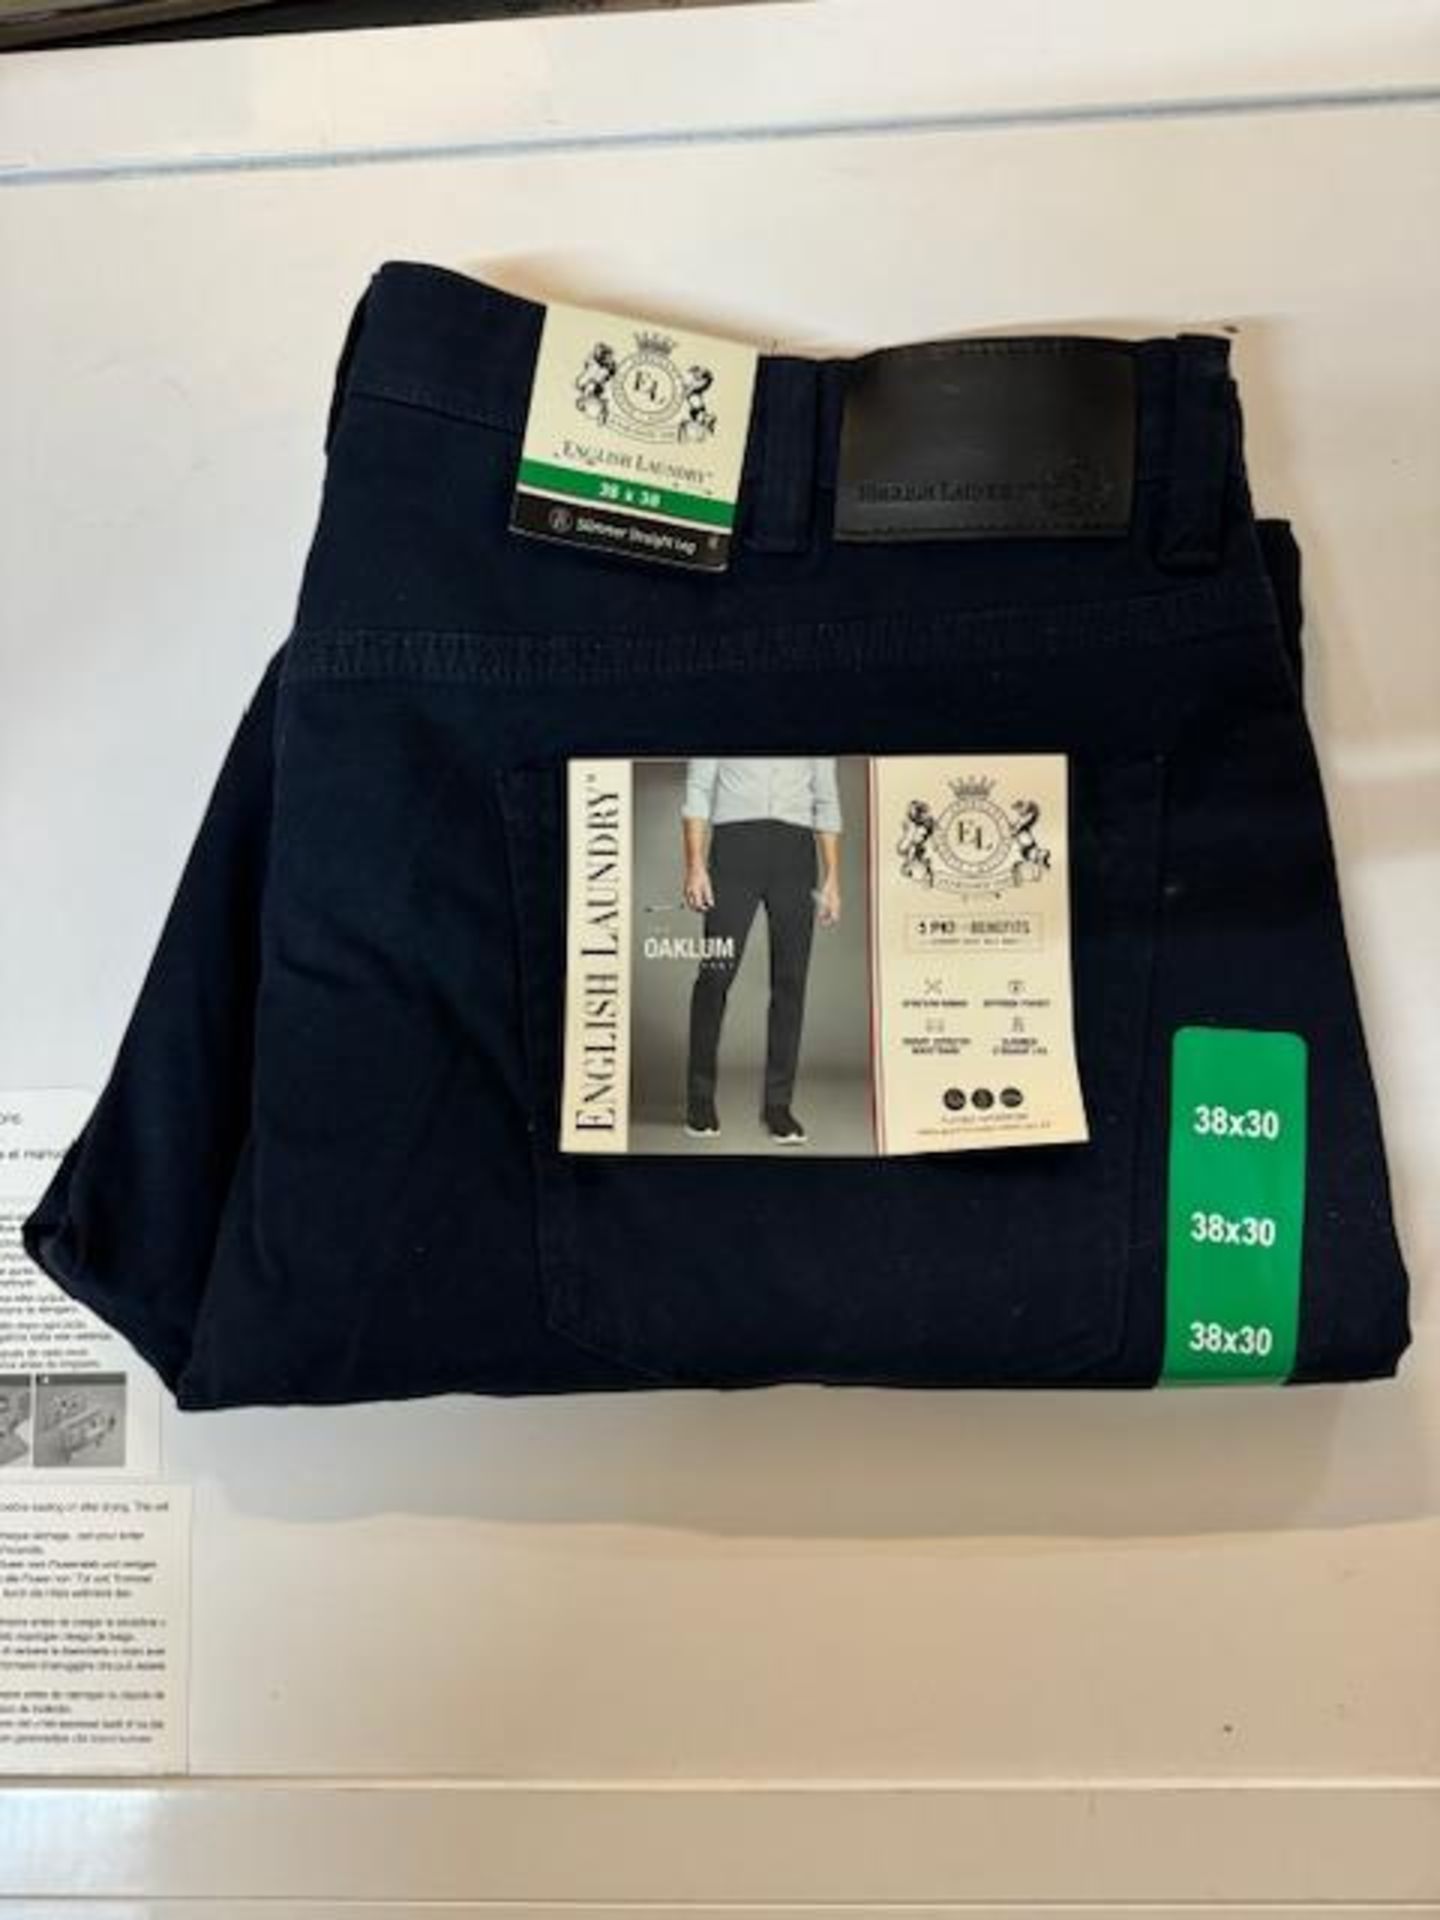 1 BRAND NEW ENGLISH LAUNDRY MIDWAY PANT, TECH STRETCH FABRIC, NAVY SIZE 38 X 30 RRP Â£24.99